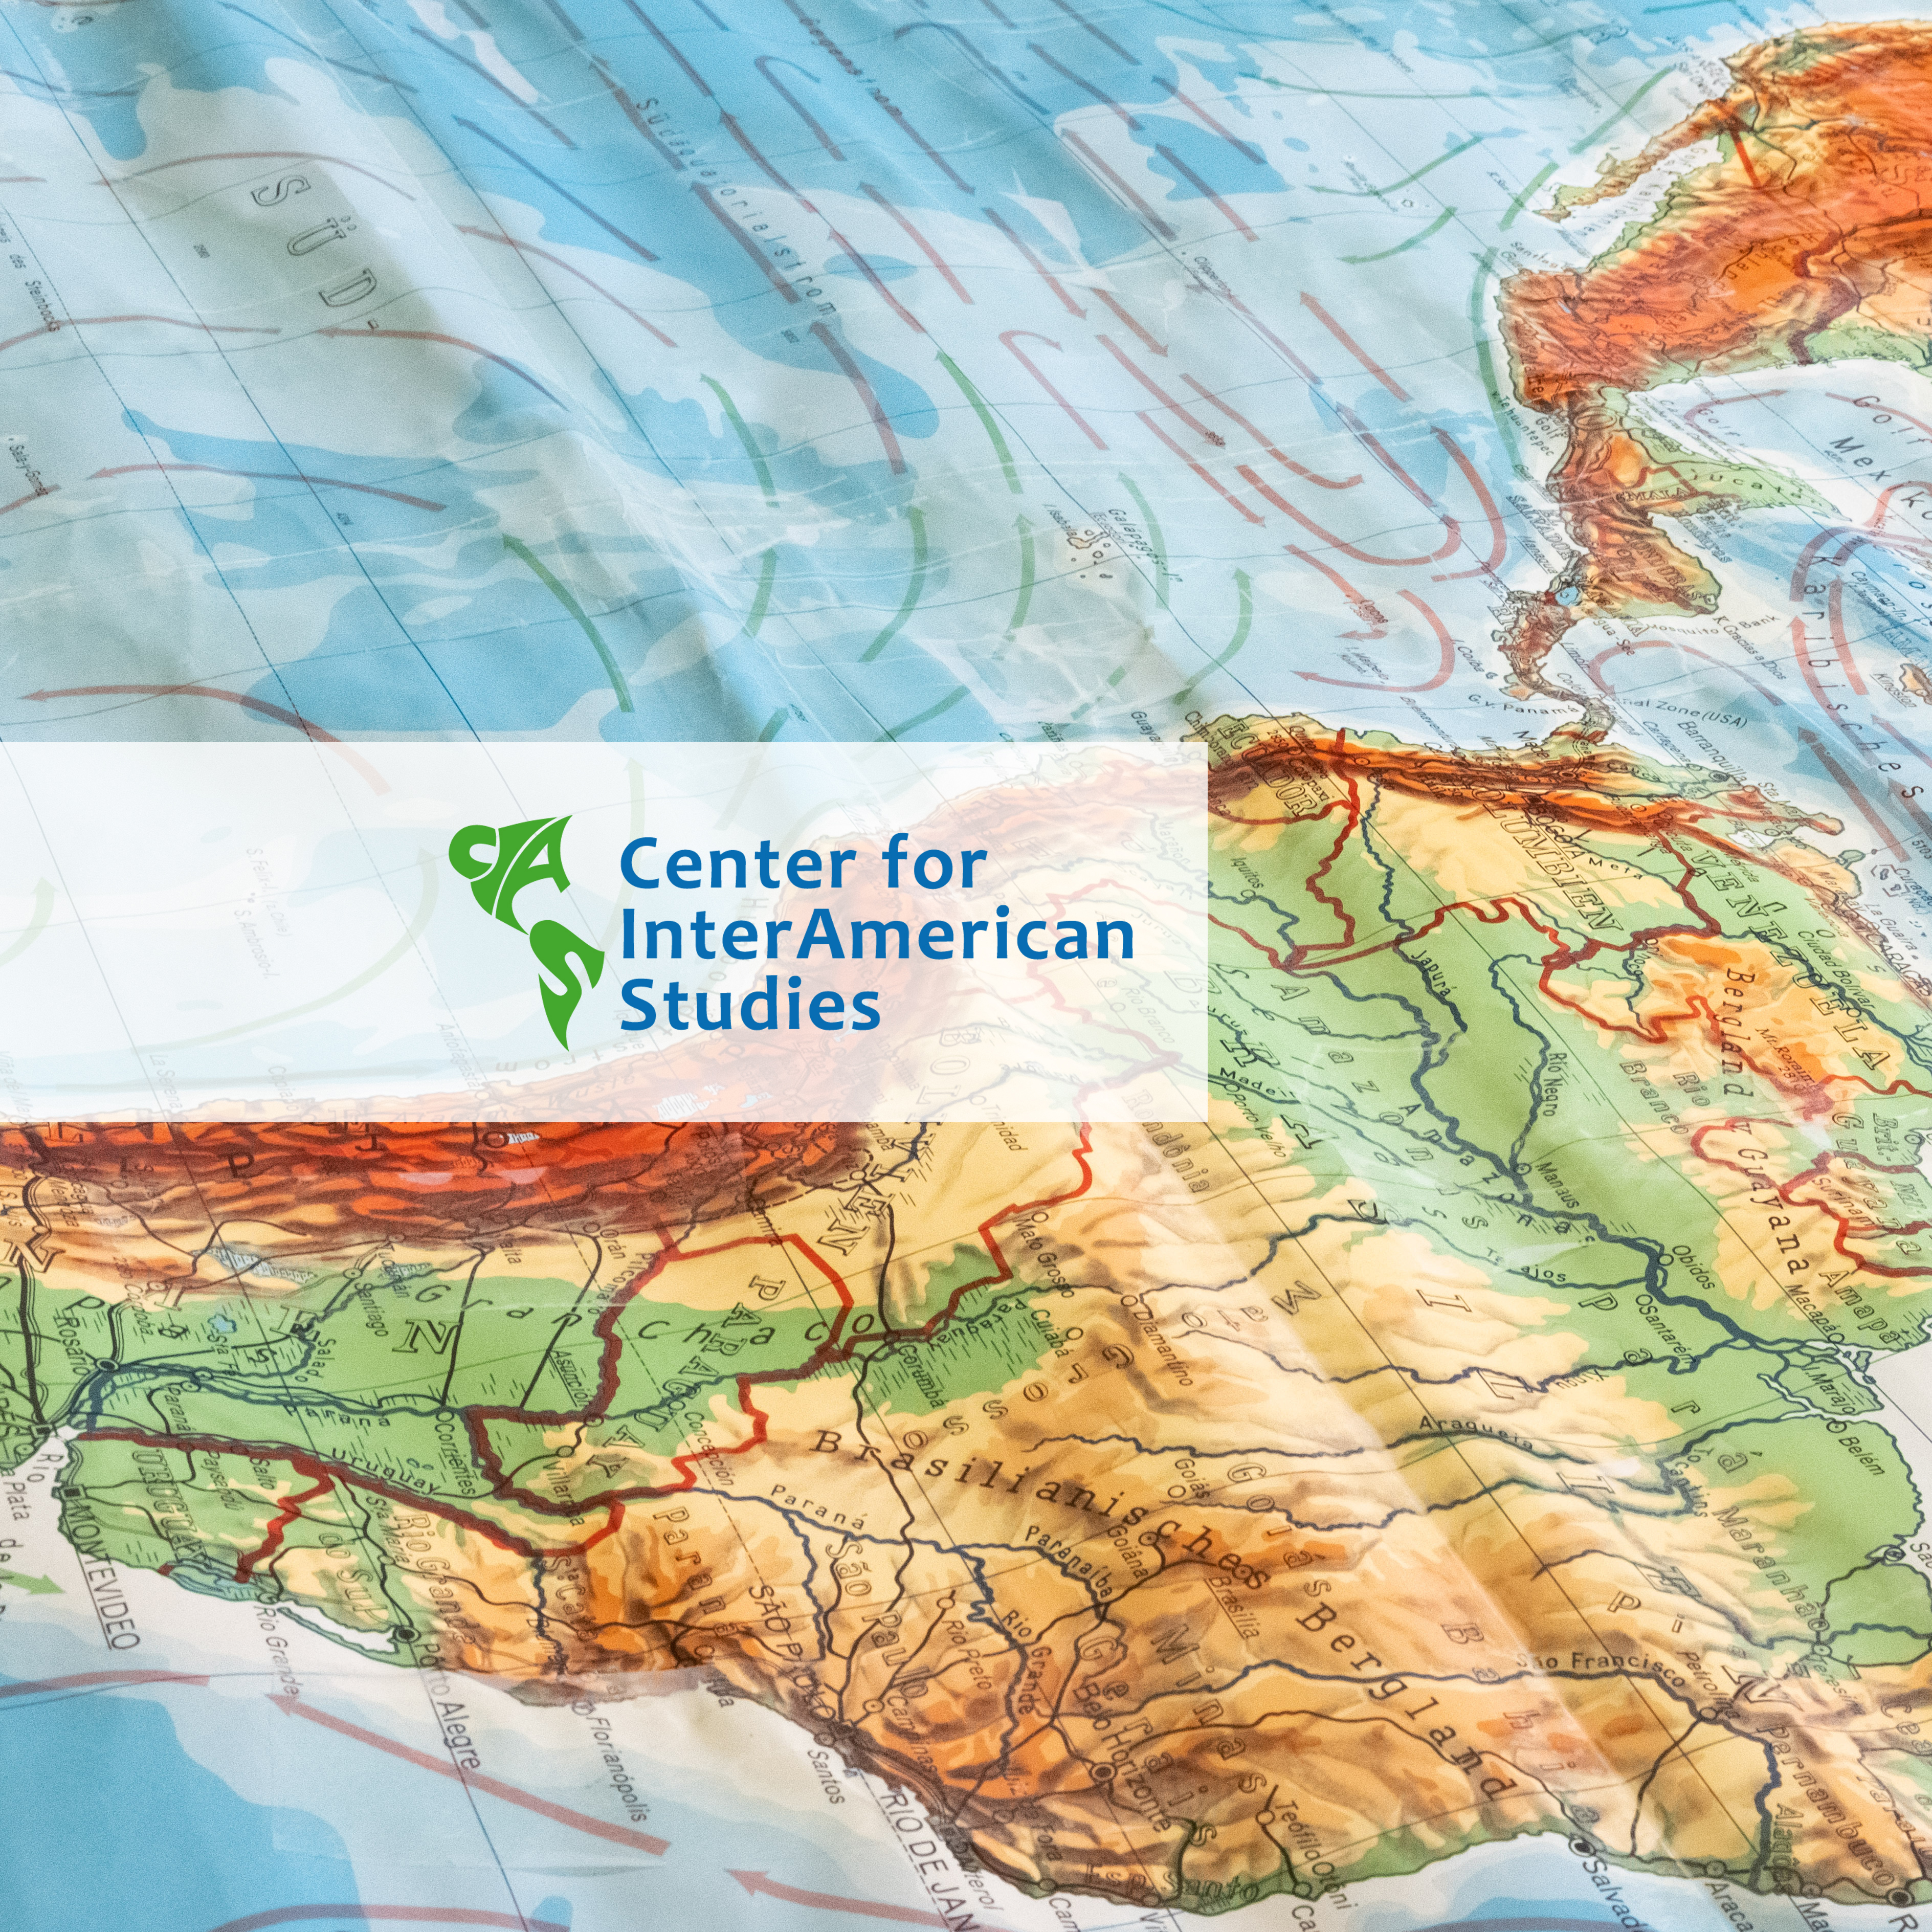 map of the americas and the logo of the center for interamerican studies